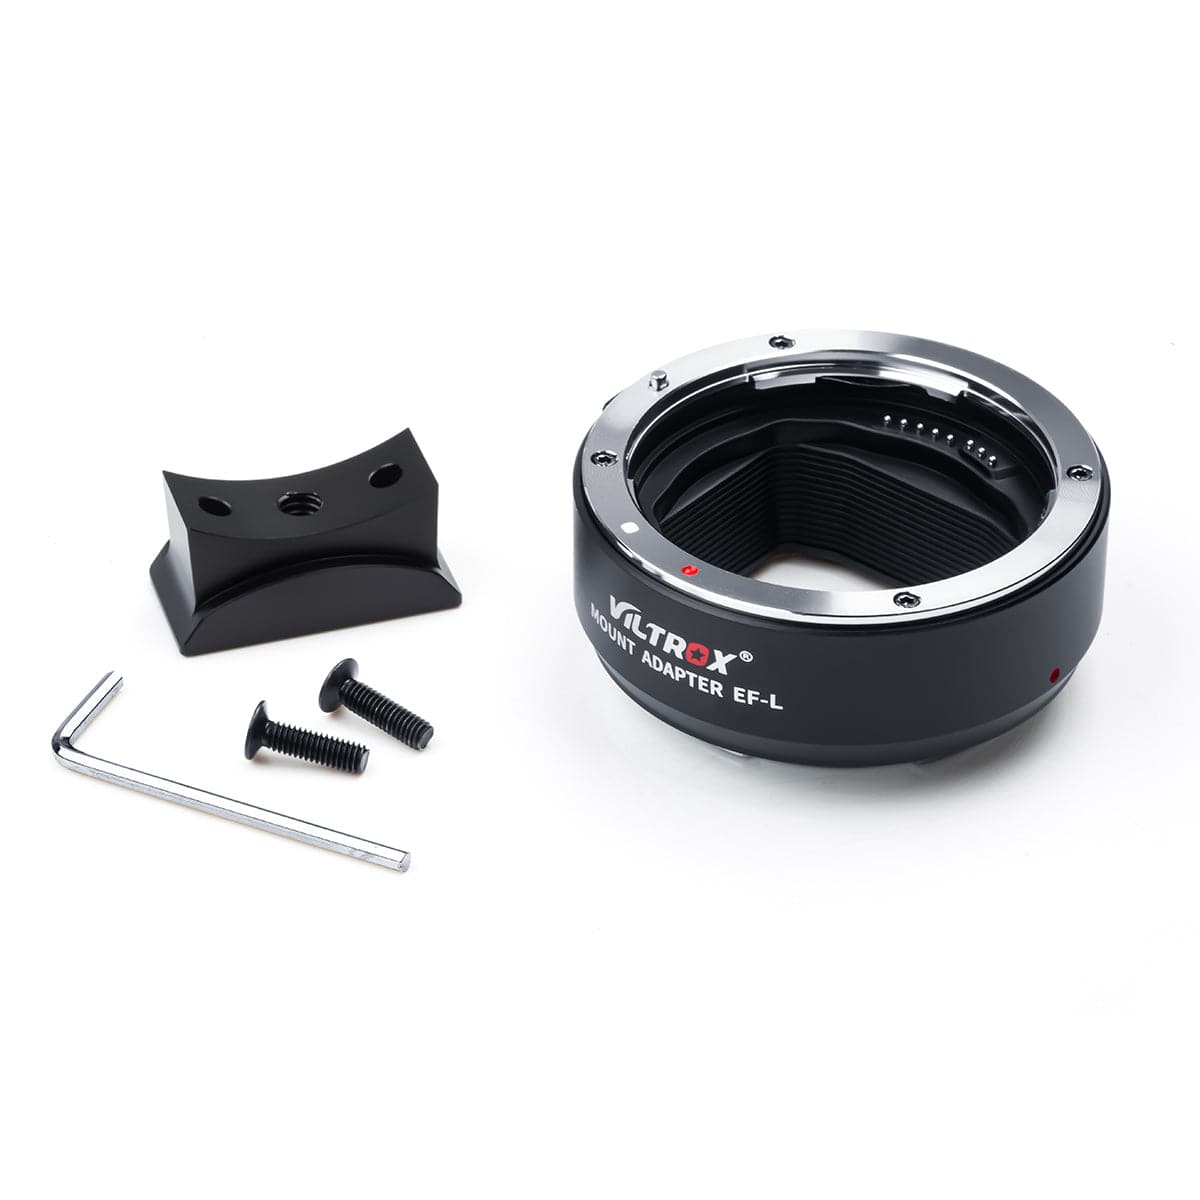 Viltrox EF-L Auto Focus Lens Mount Adapter For Canon EF/EF-S Lens Matched with Leica/Panasonic/Sigma L-mount Bodies